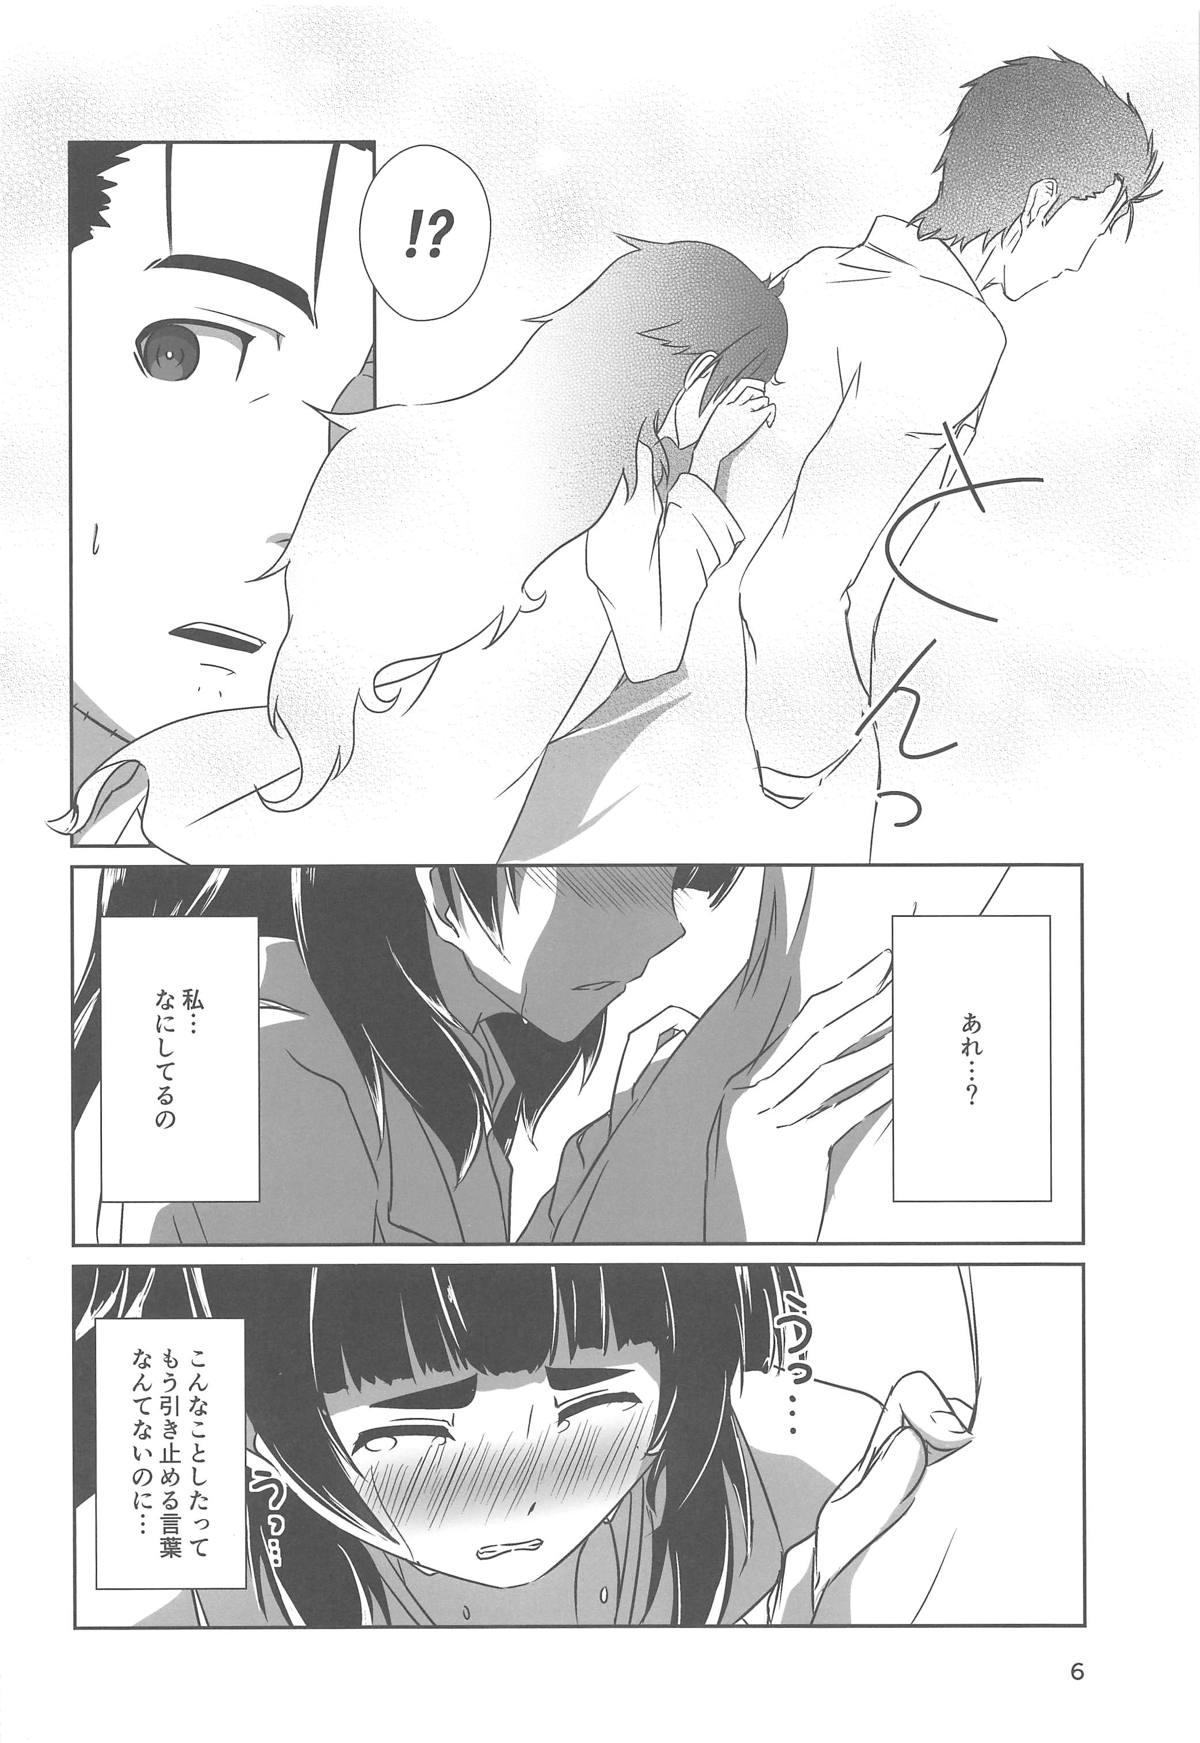 Femdom Porn Soushisouai no NG Word - Steinsgate Black Dick - Page 5